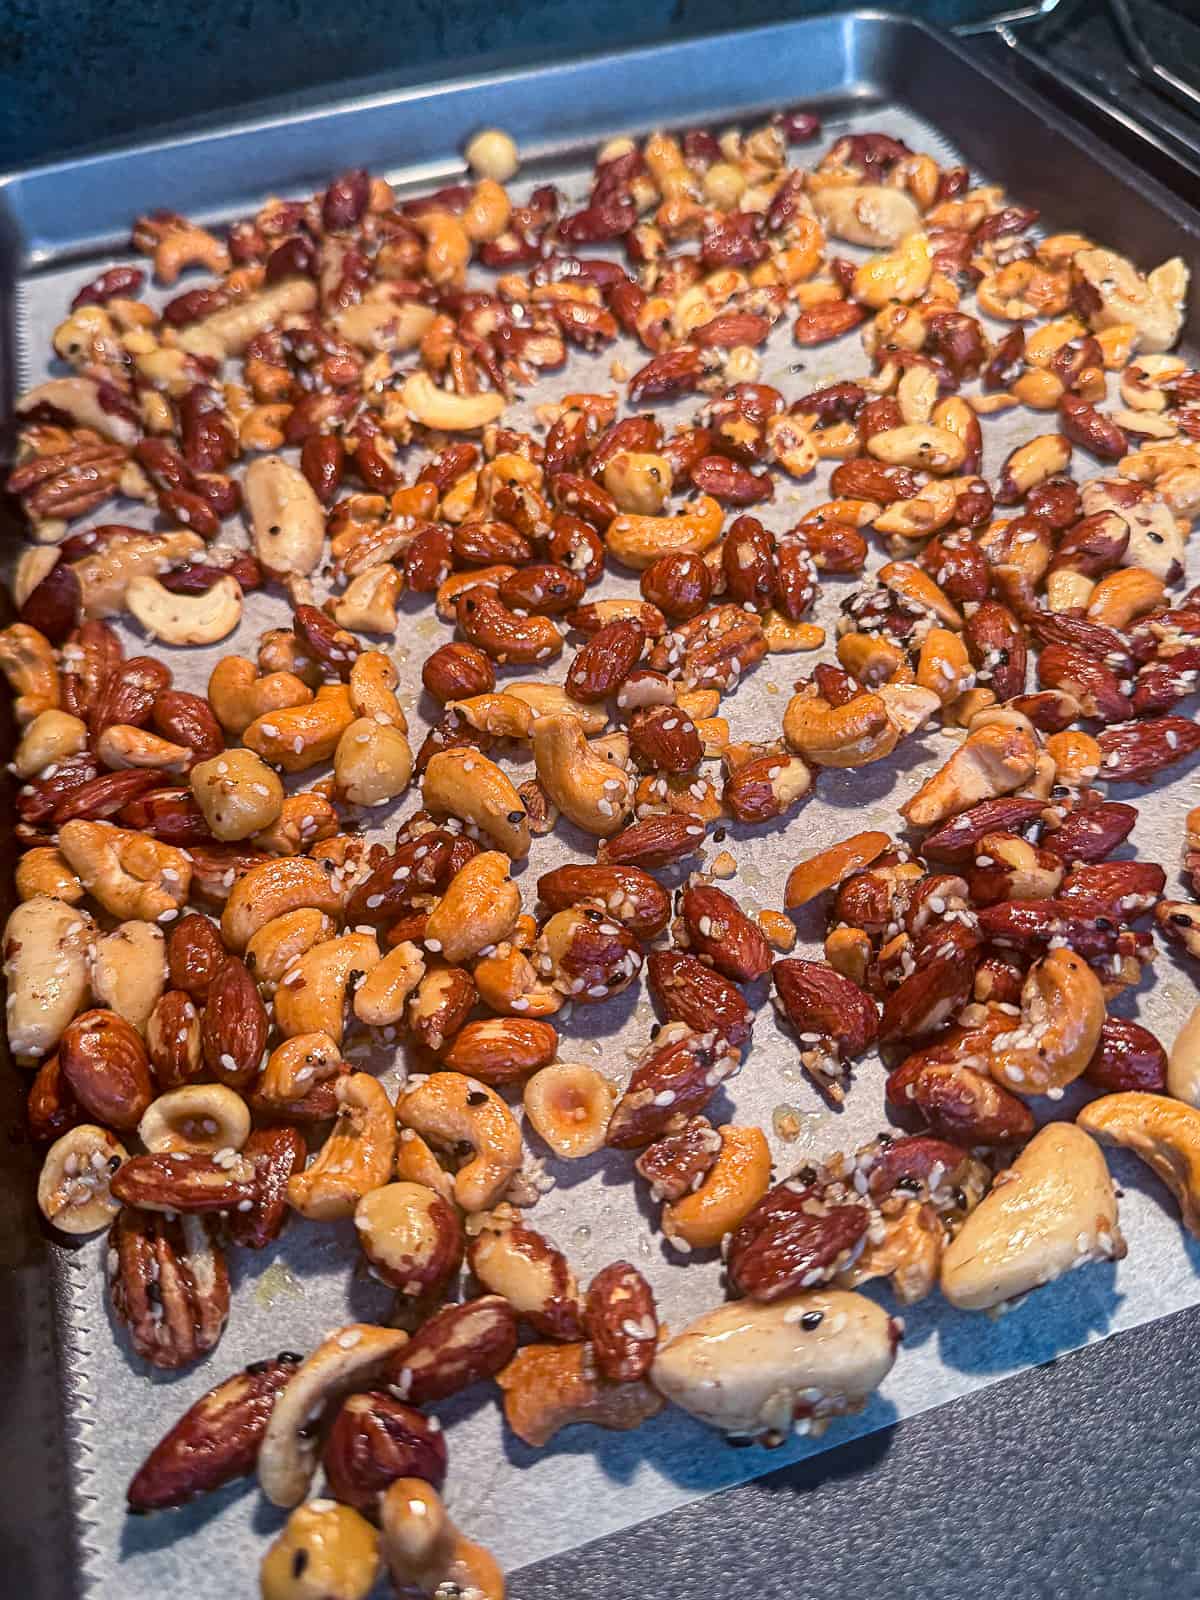 Baking Everything Bagel Spiced Nuts in the oven 